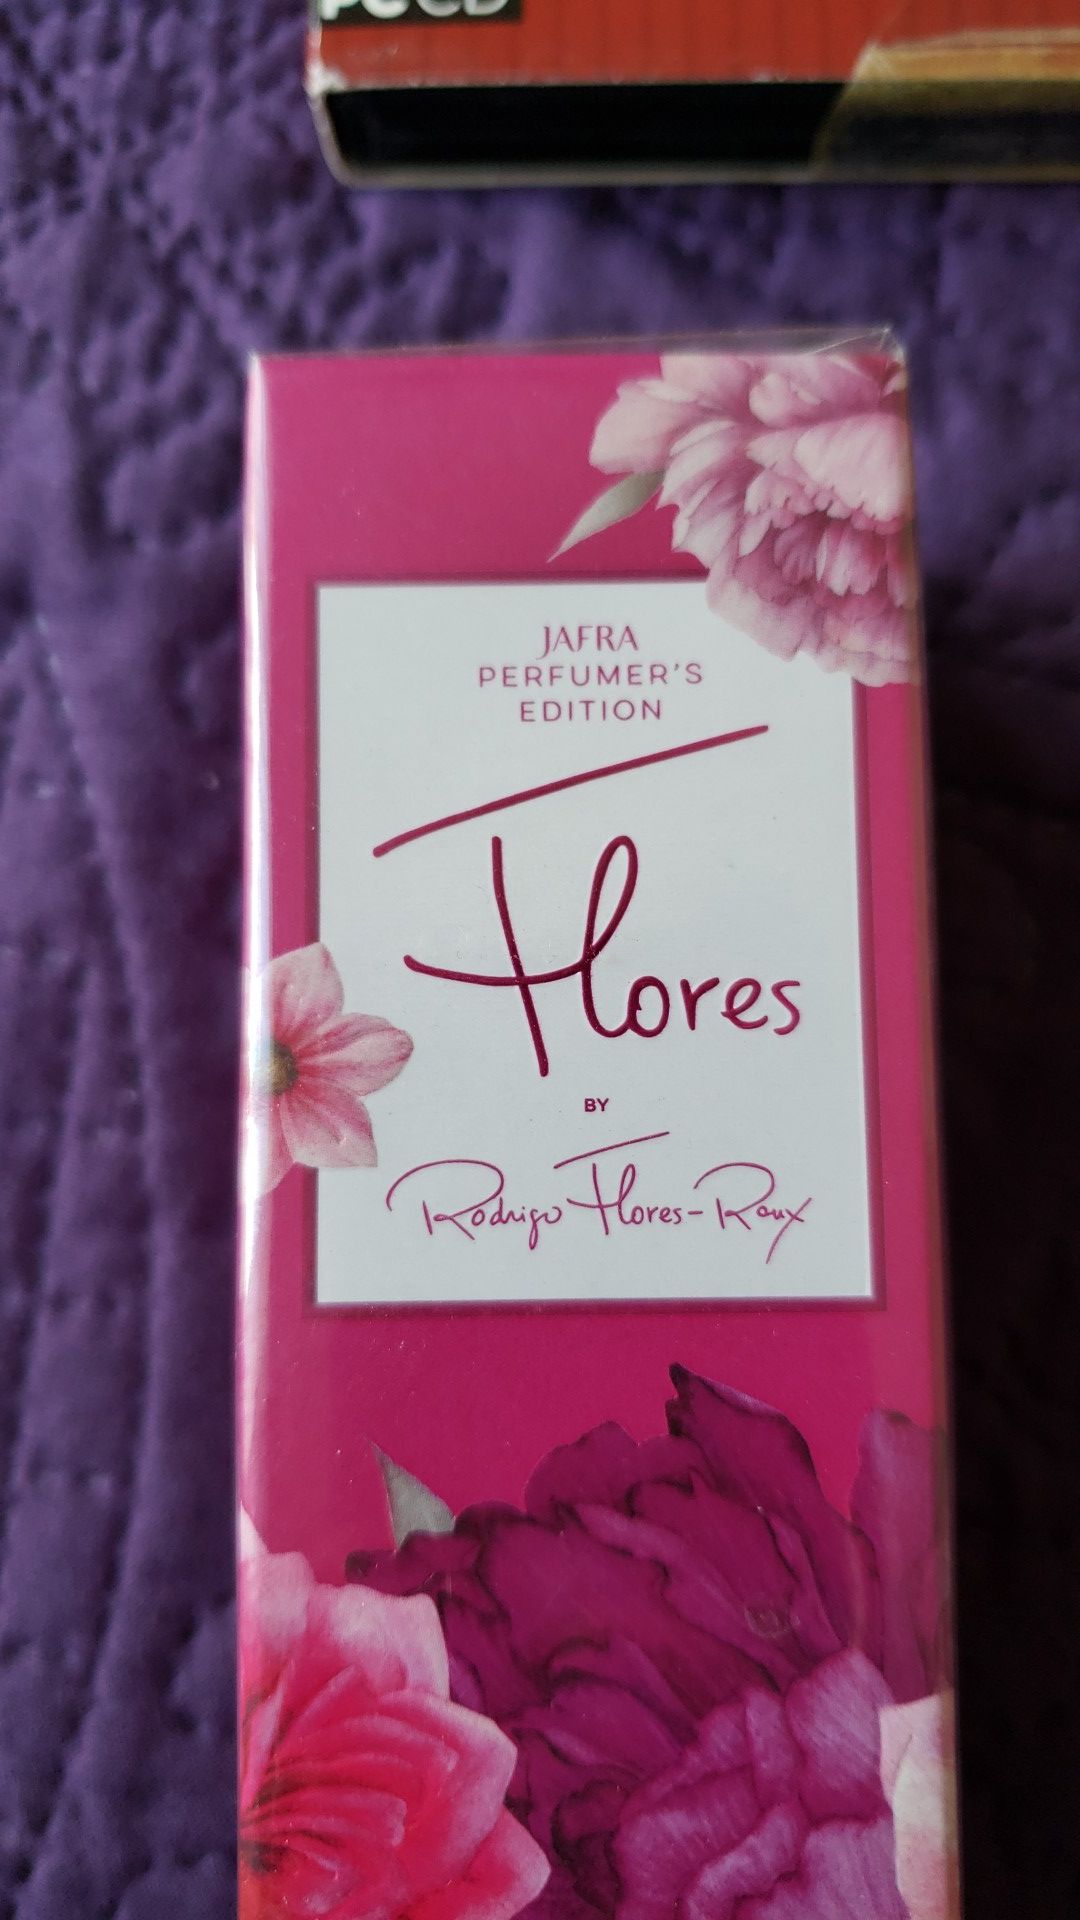 Jafra Flores perfume. New. Mother's Day gift. Sealed in box.